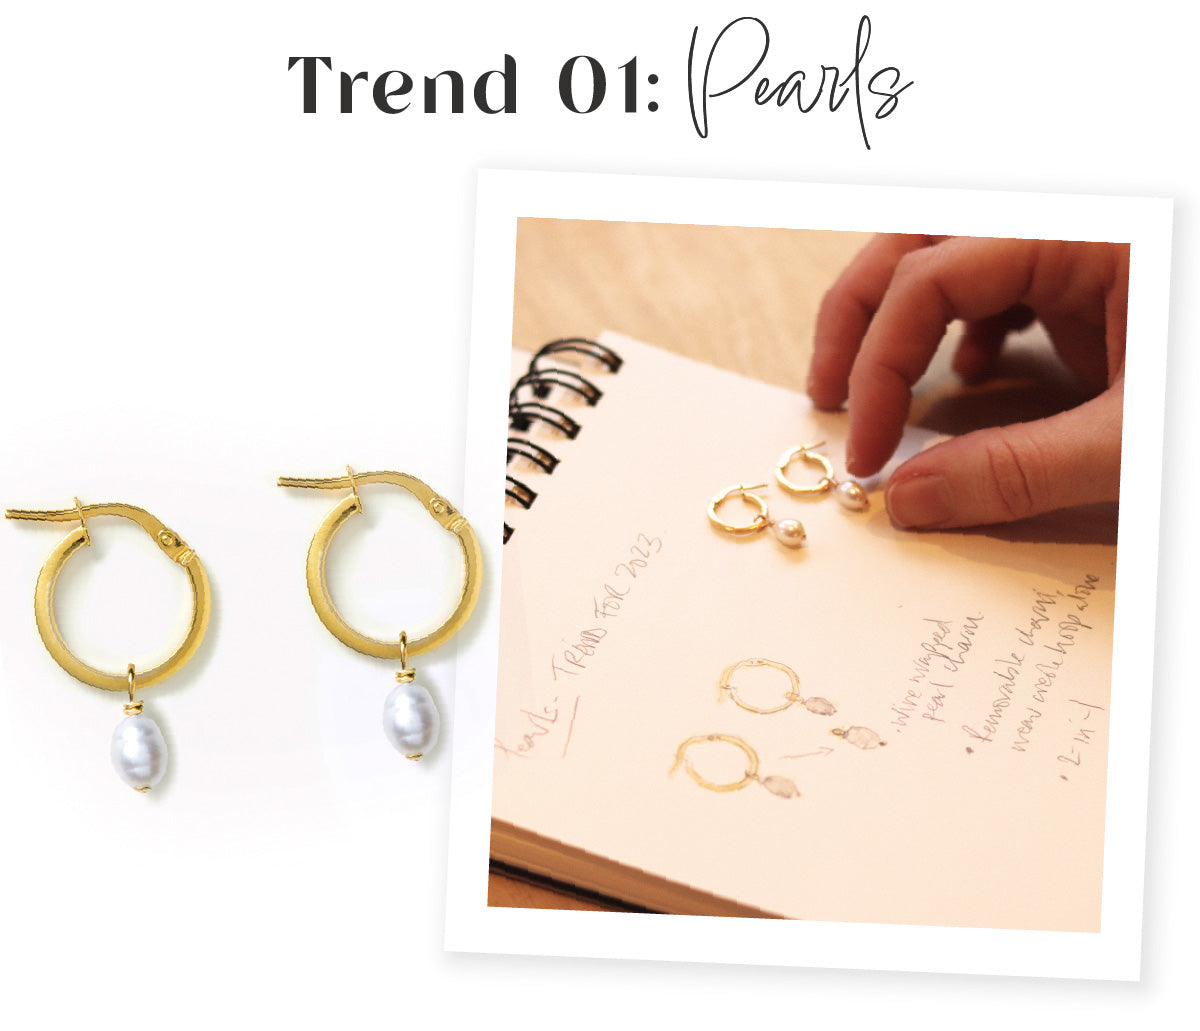 Trend 01: Pearls